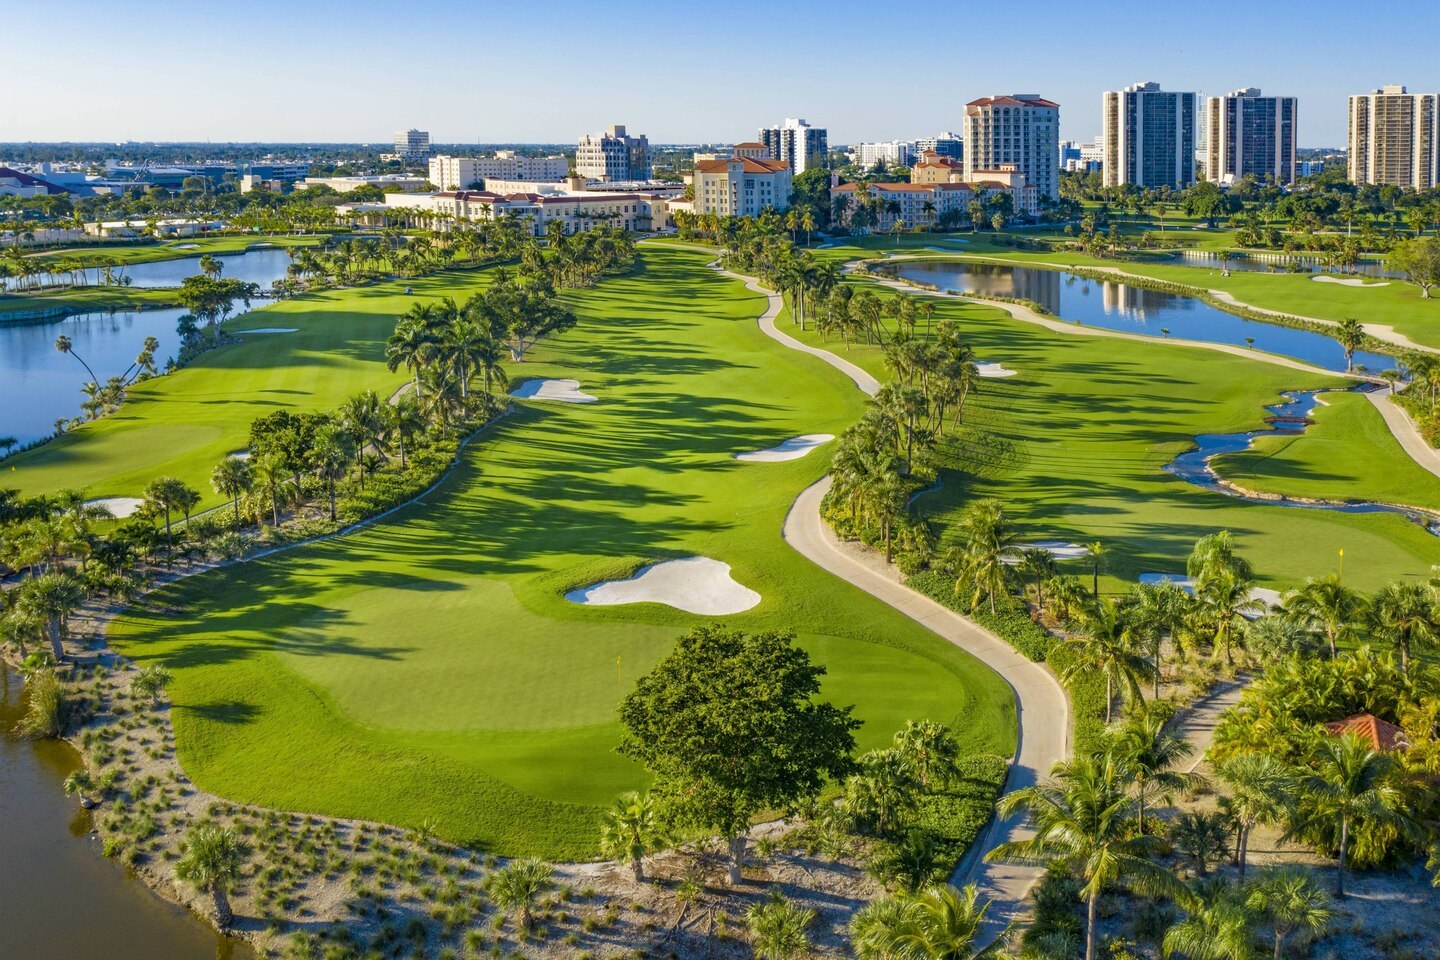 Golf Vacation Package - JW Marriott Miami Turnberry Resort & Spa Stay & Play from $483 per day!